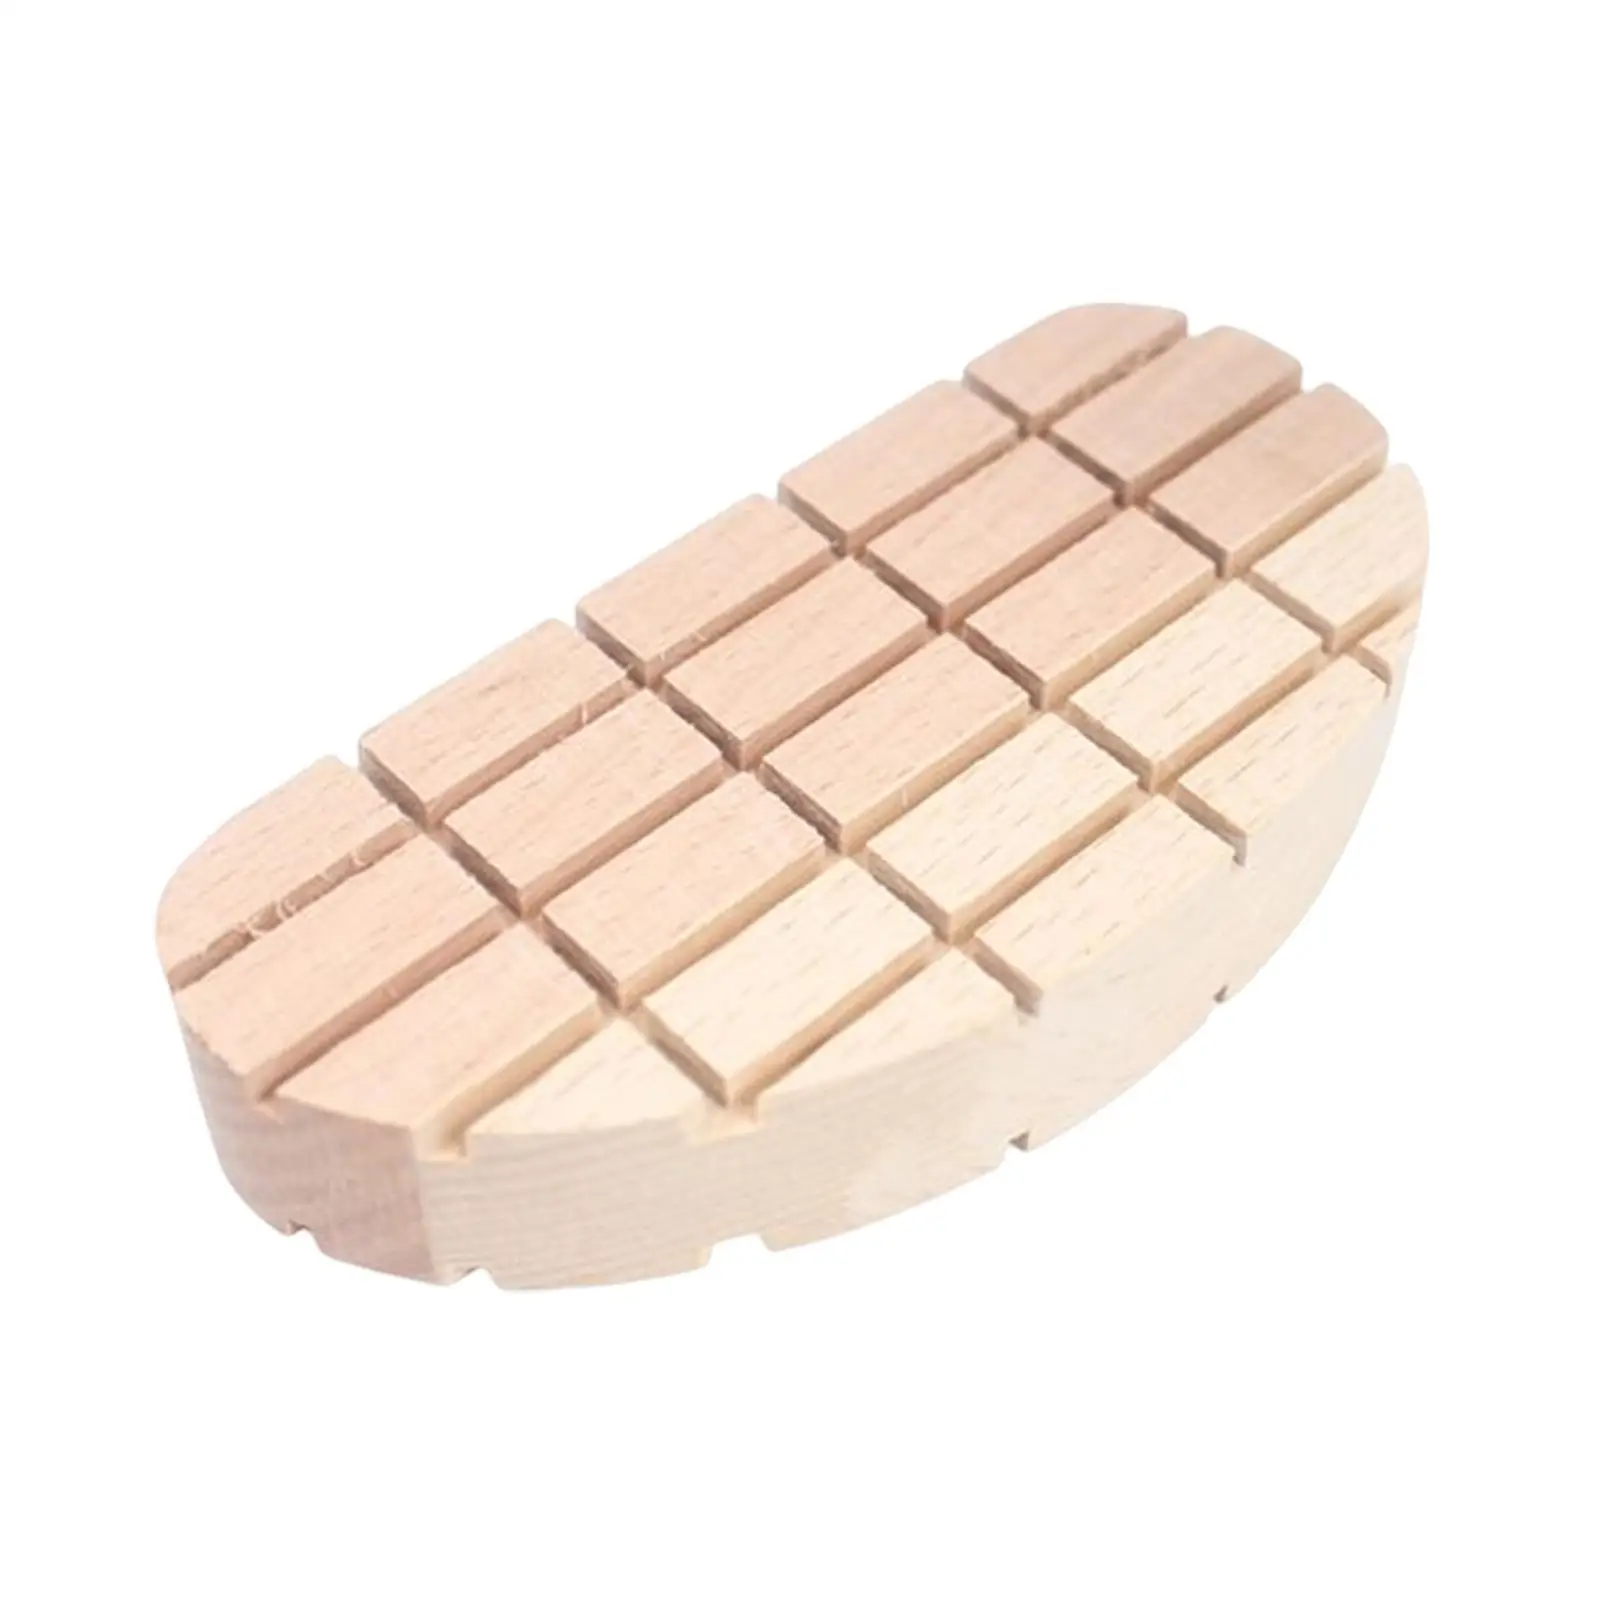 Cow Trimming Cushion Wooden Competition Protection Manicure Care Accessories Wearproof Cow Hoof Pad for Goats Sheep Livestock